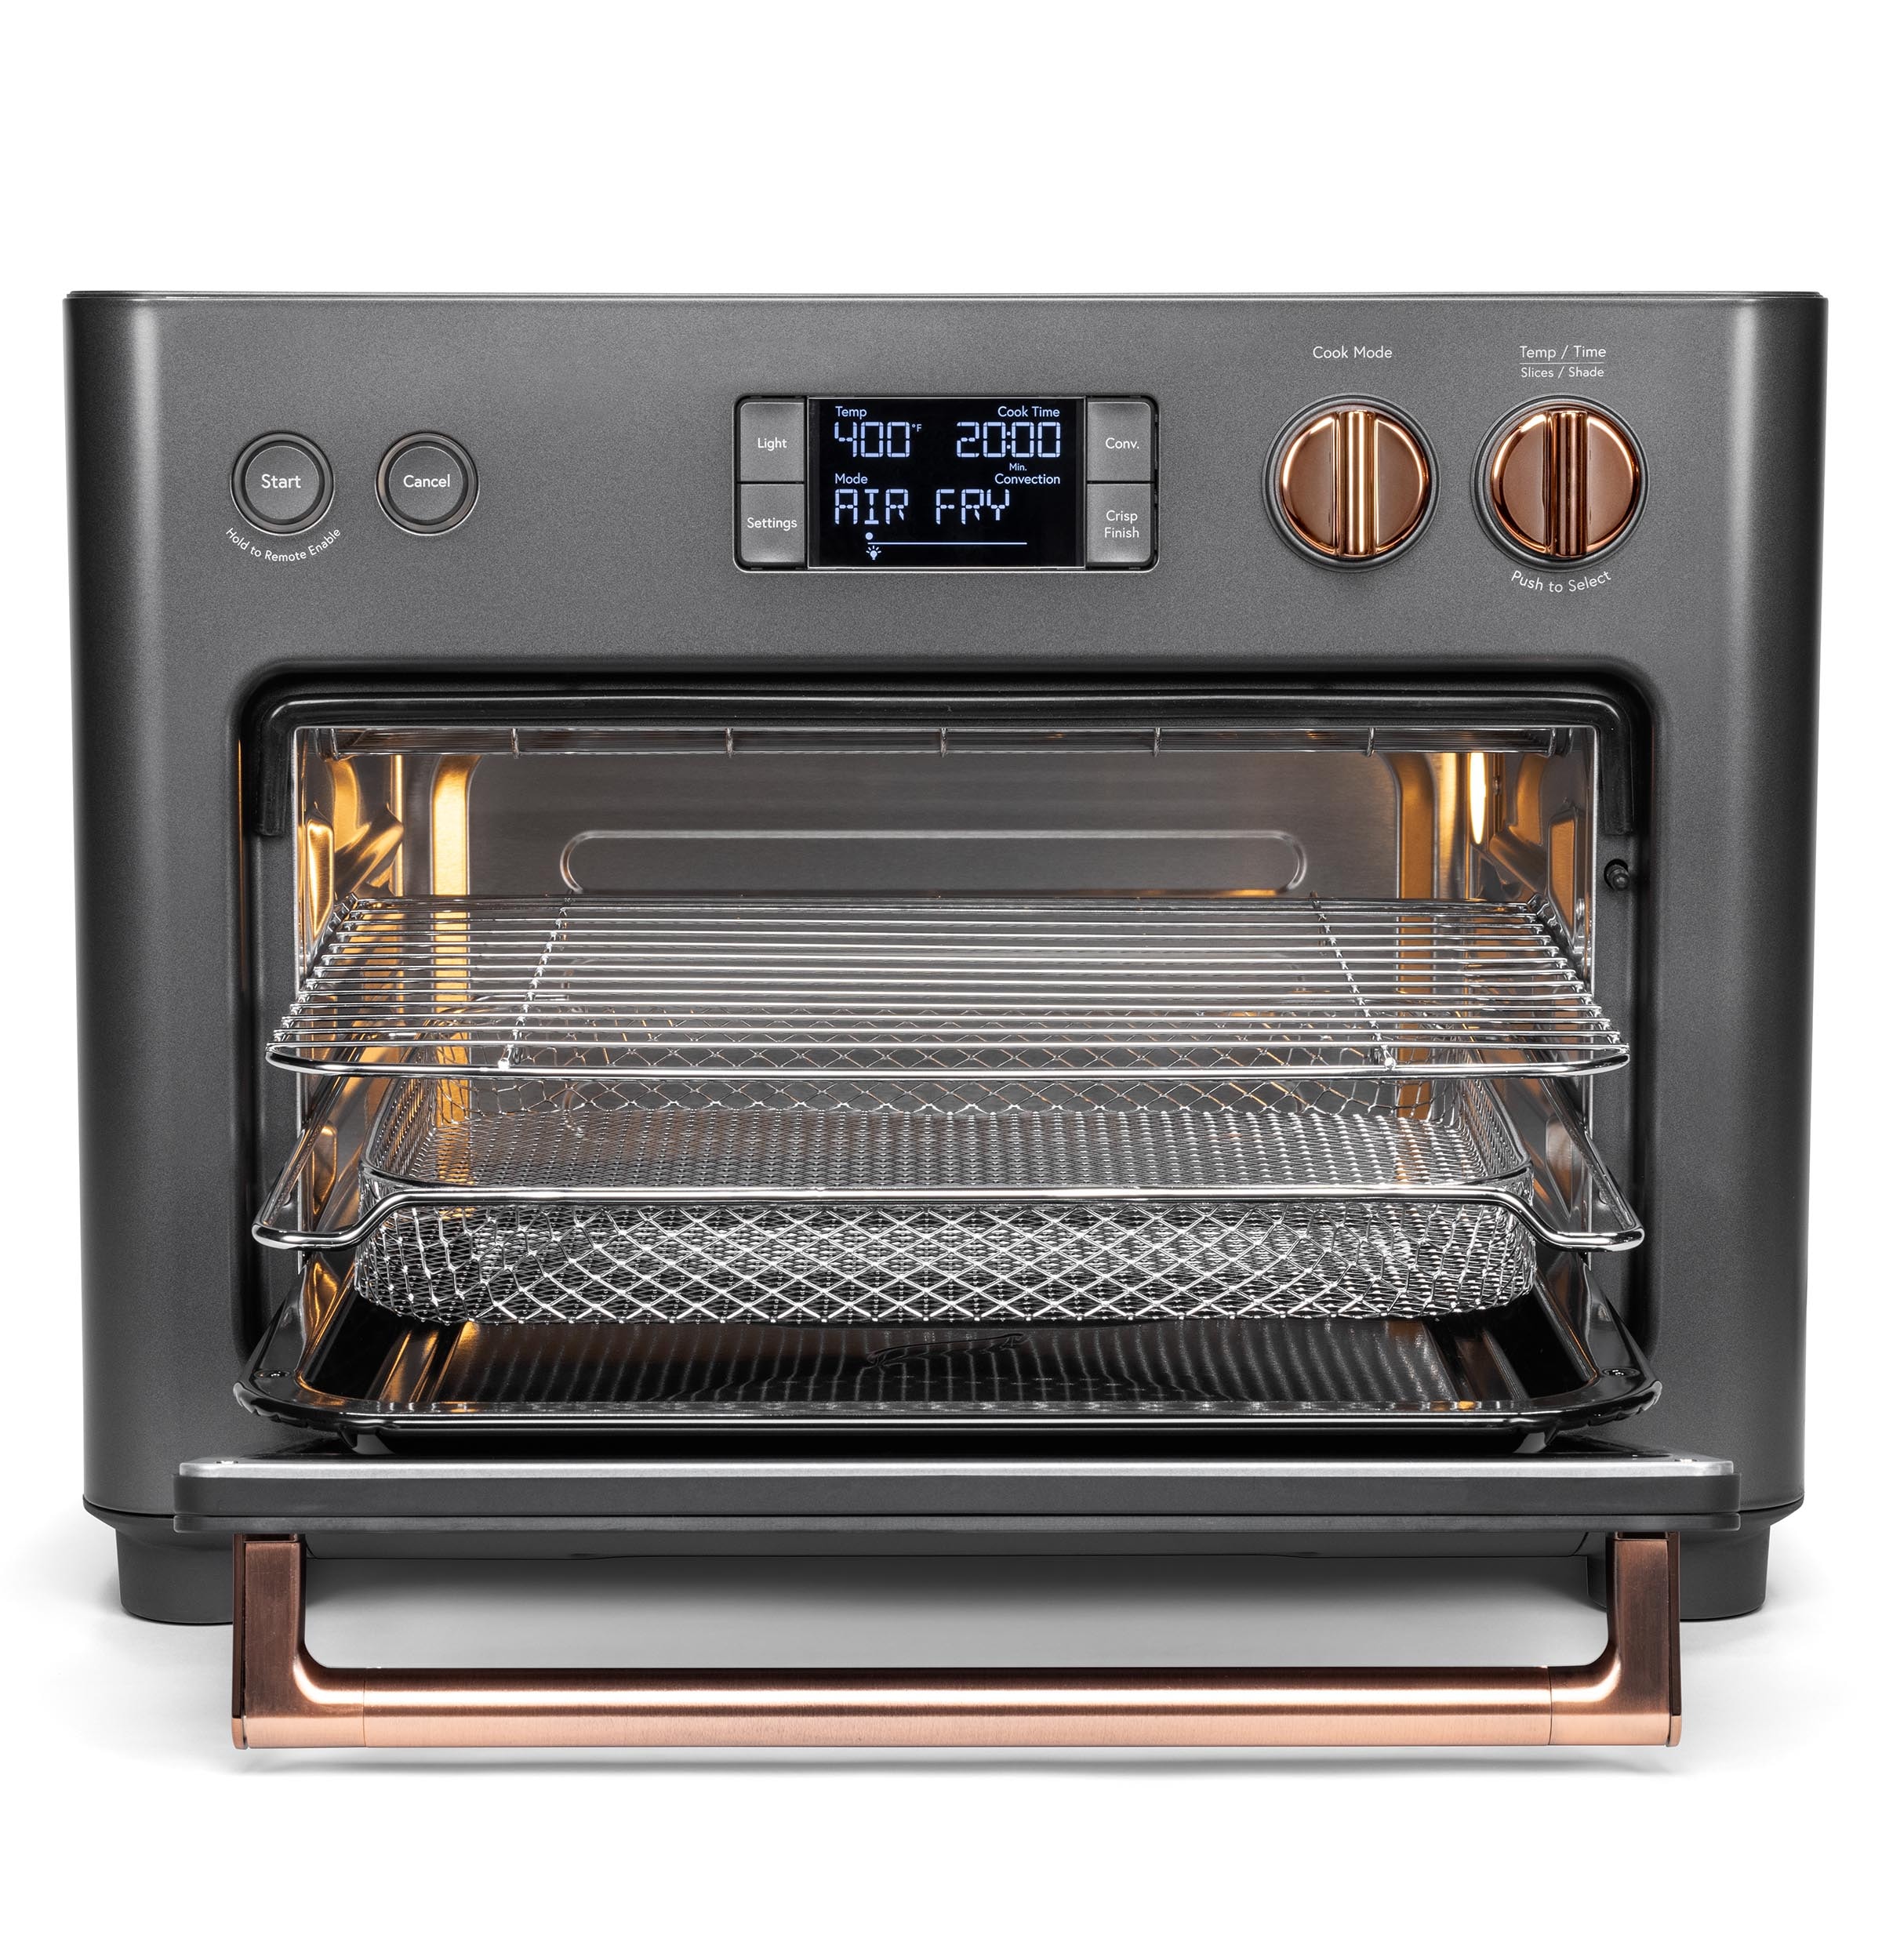 Deco Chef 24 qt Stainless Steel Countertop 1700 Watt Toaster Oven with Built-in Air Fryer and Included Rotisserie Assembly, Grill Rack, Frying